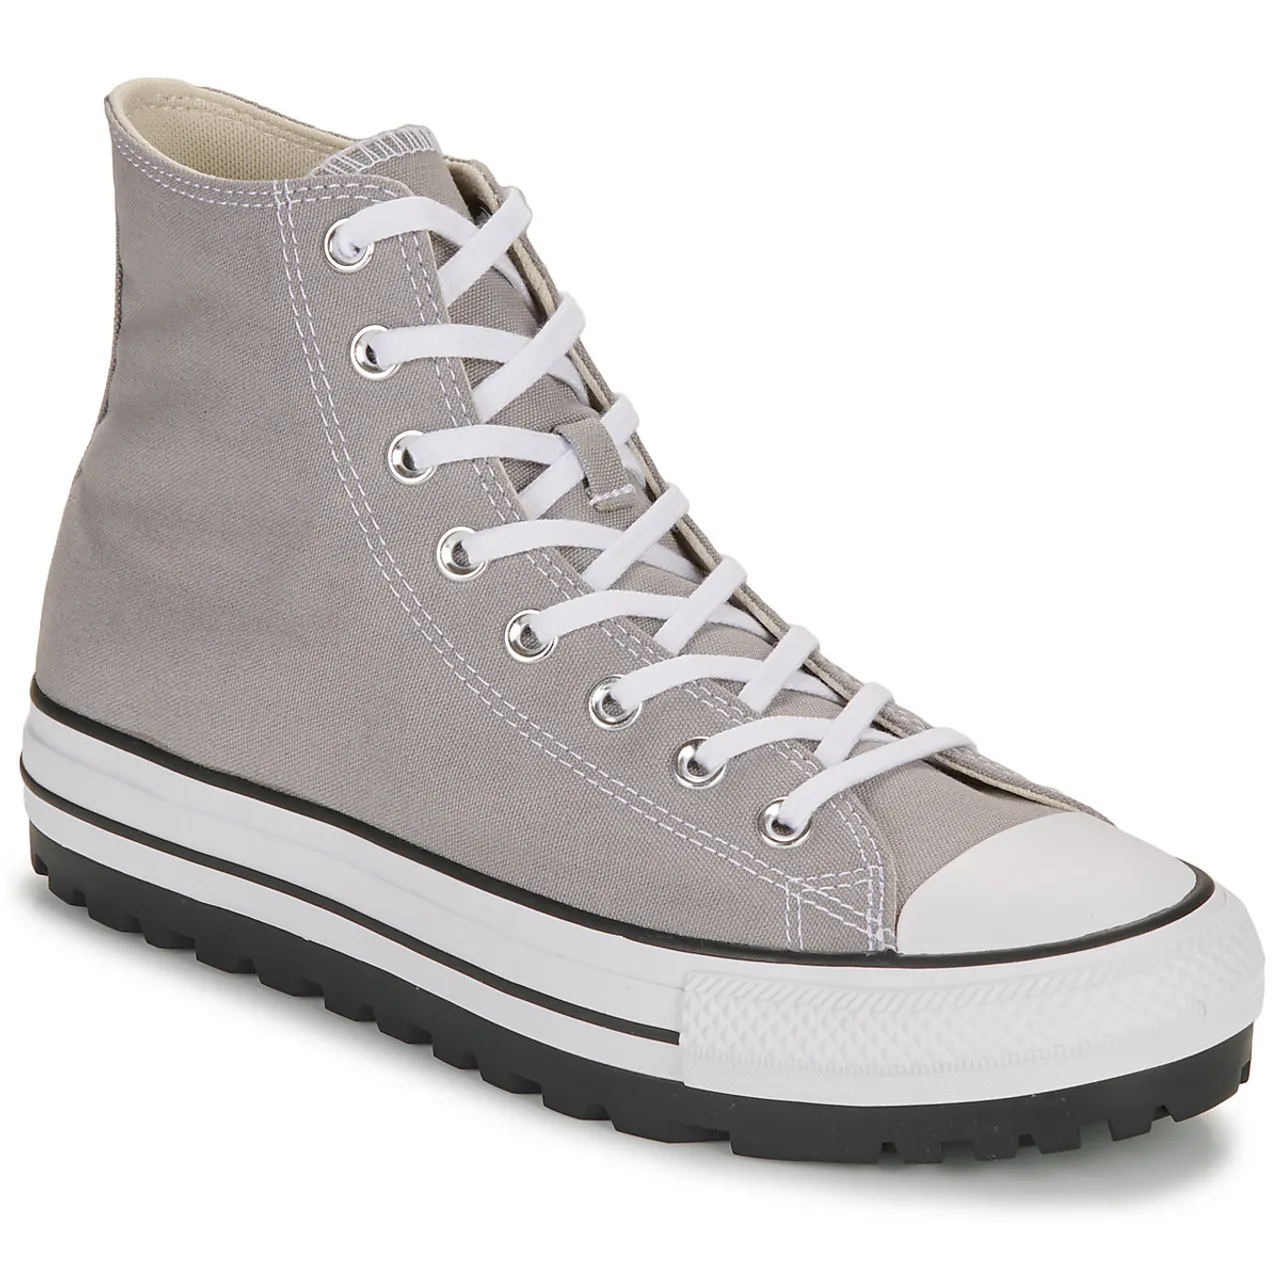 Converse  CHUCK TAYLOR ALL STAR CITY TREK  men's Shoes (High-top Trainers) in Grey